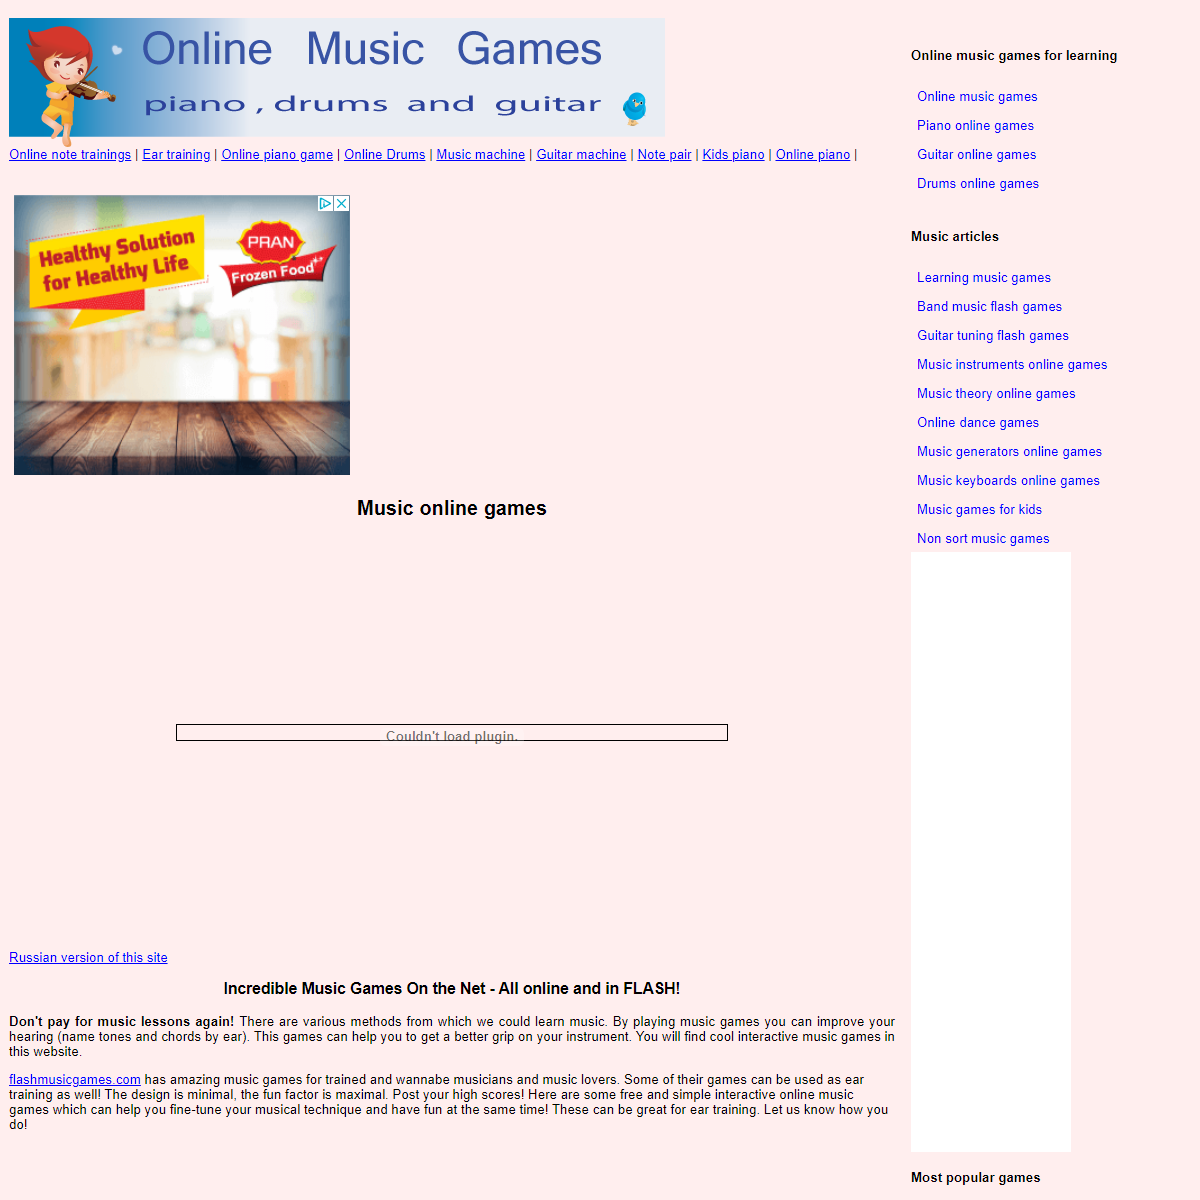 A complete backup of http://flashmusicgames.com/